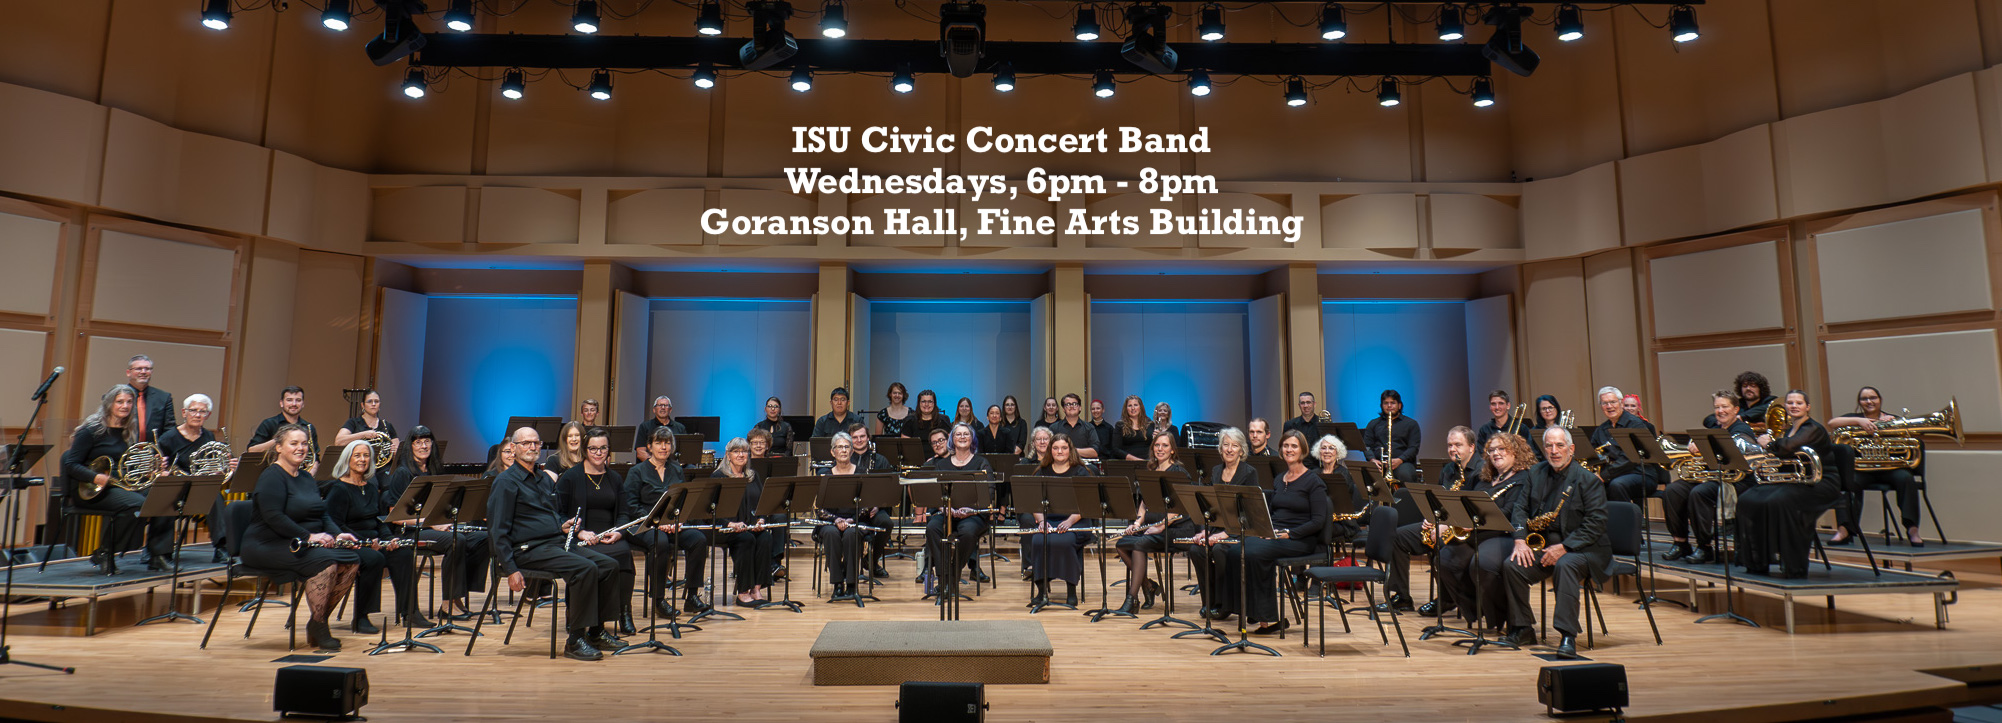 photo of the civic concert band